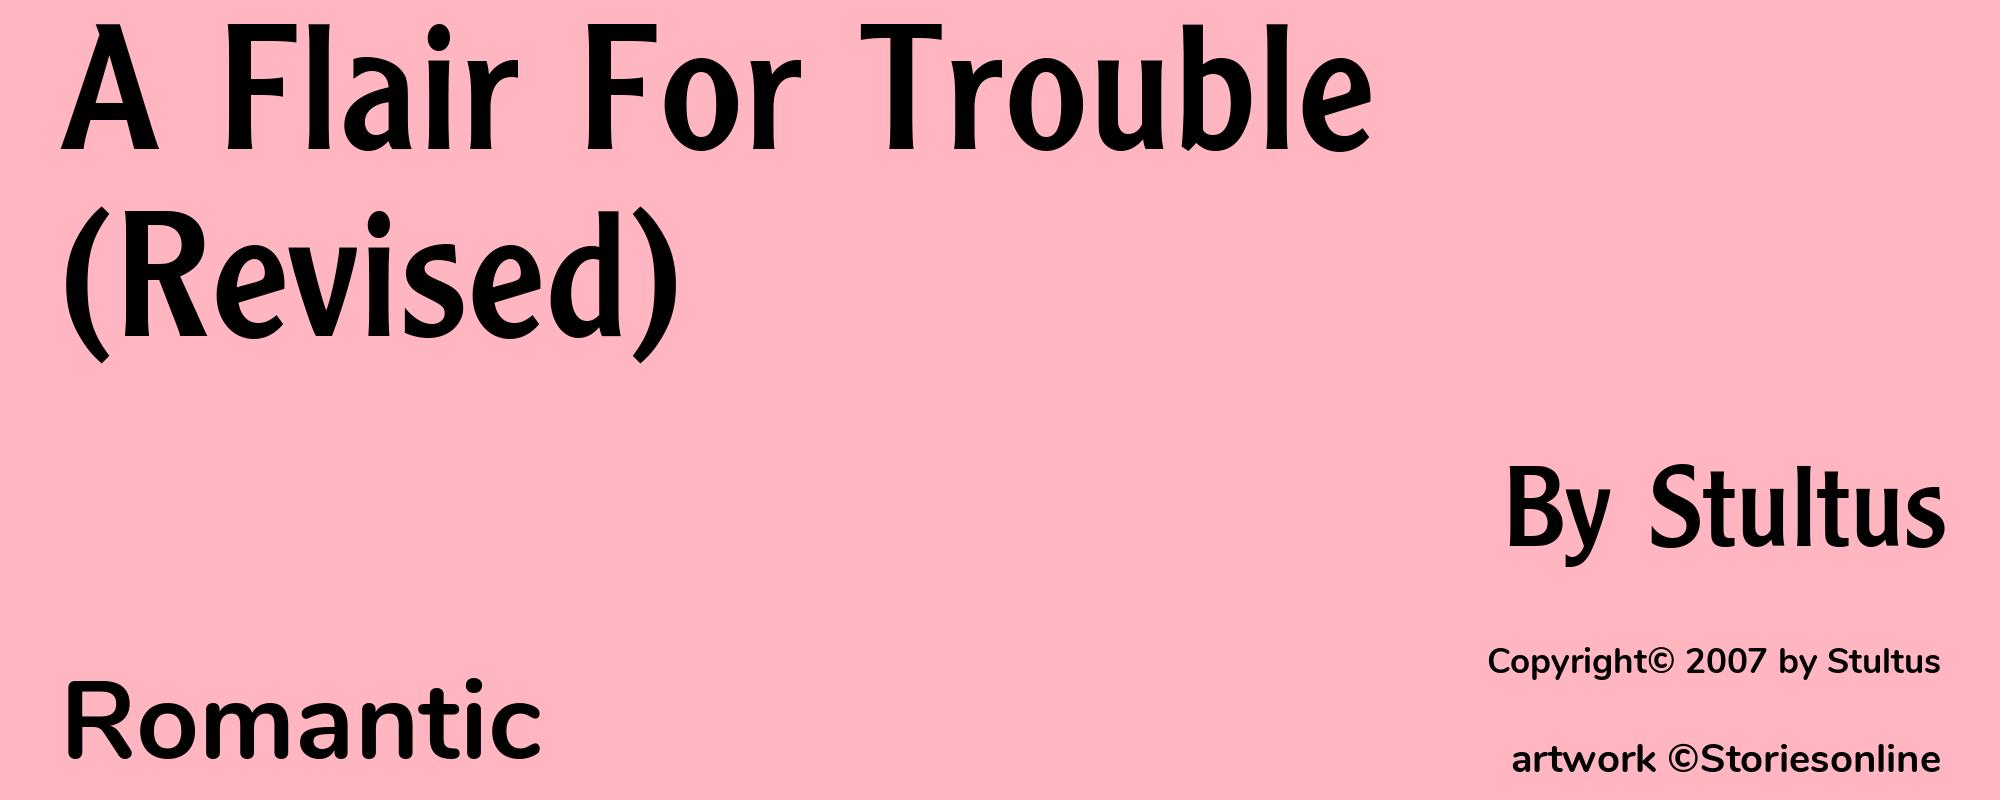 A Flair For Trouble (Revised) - Cover